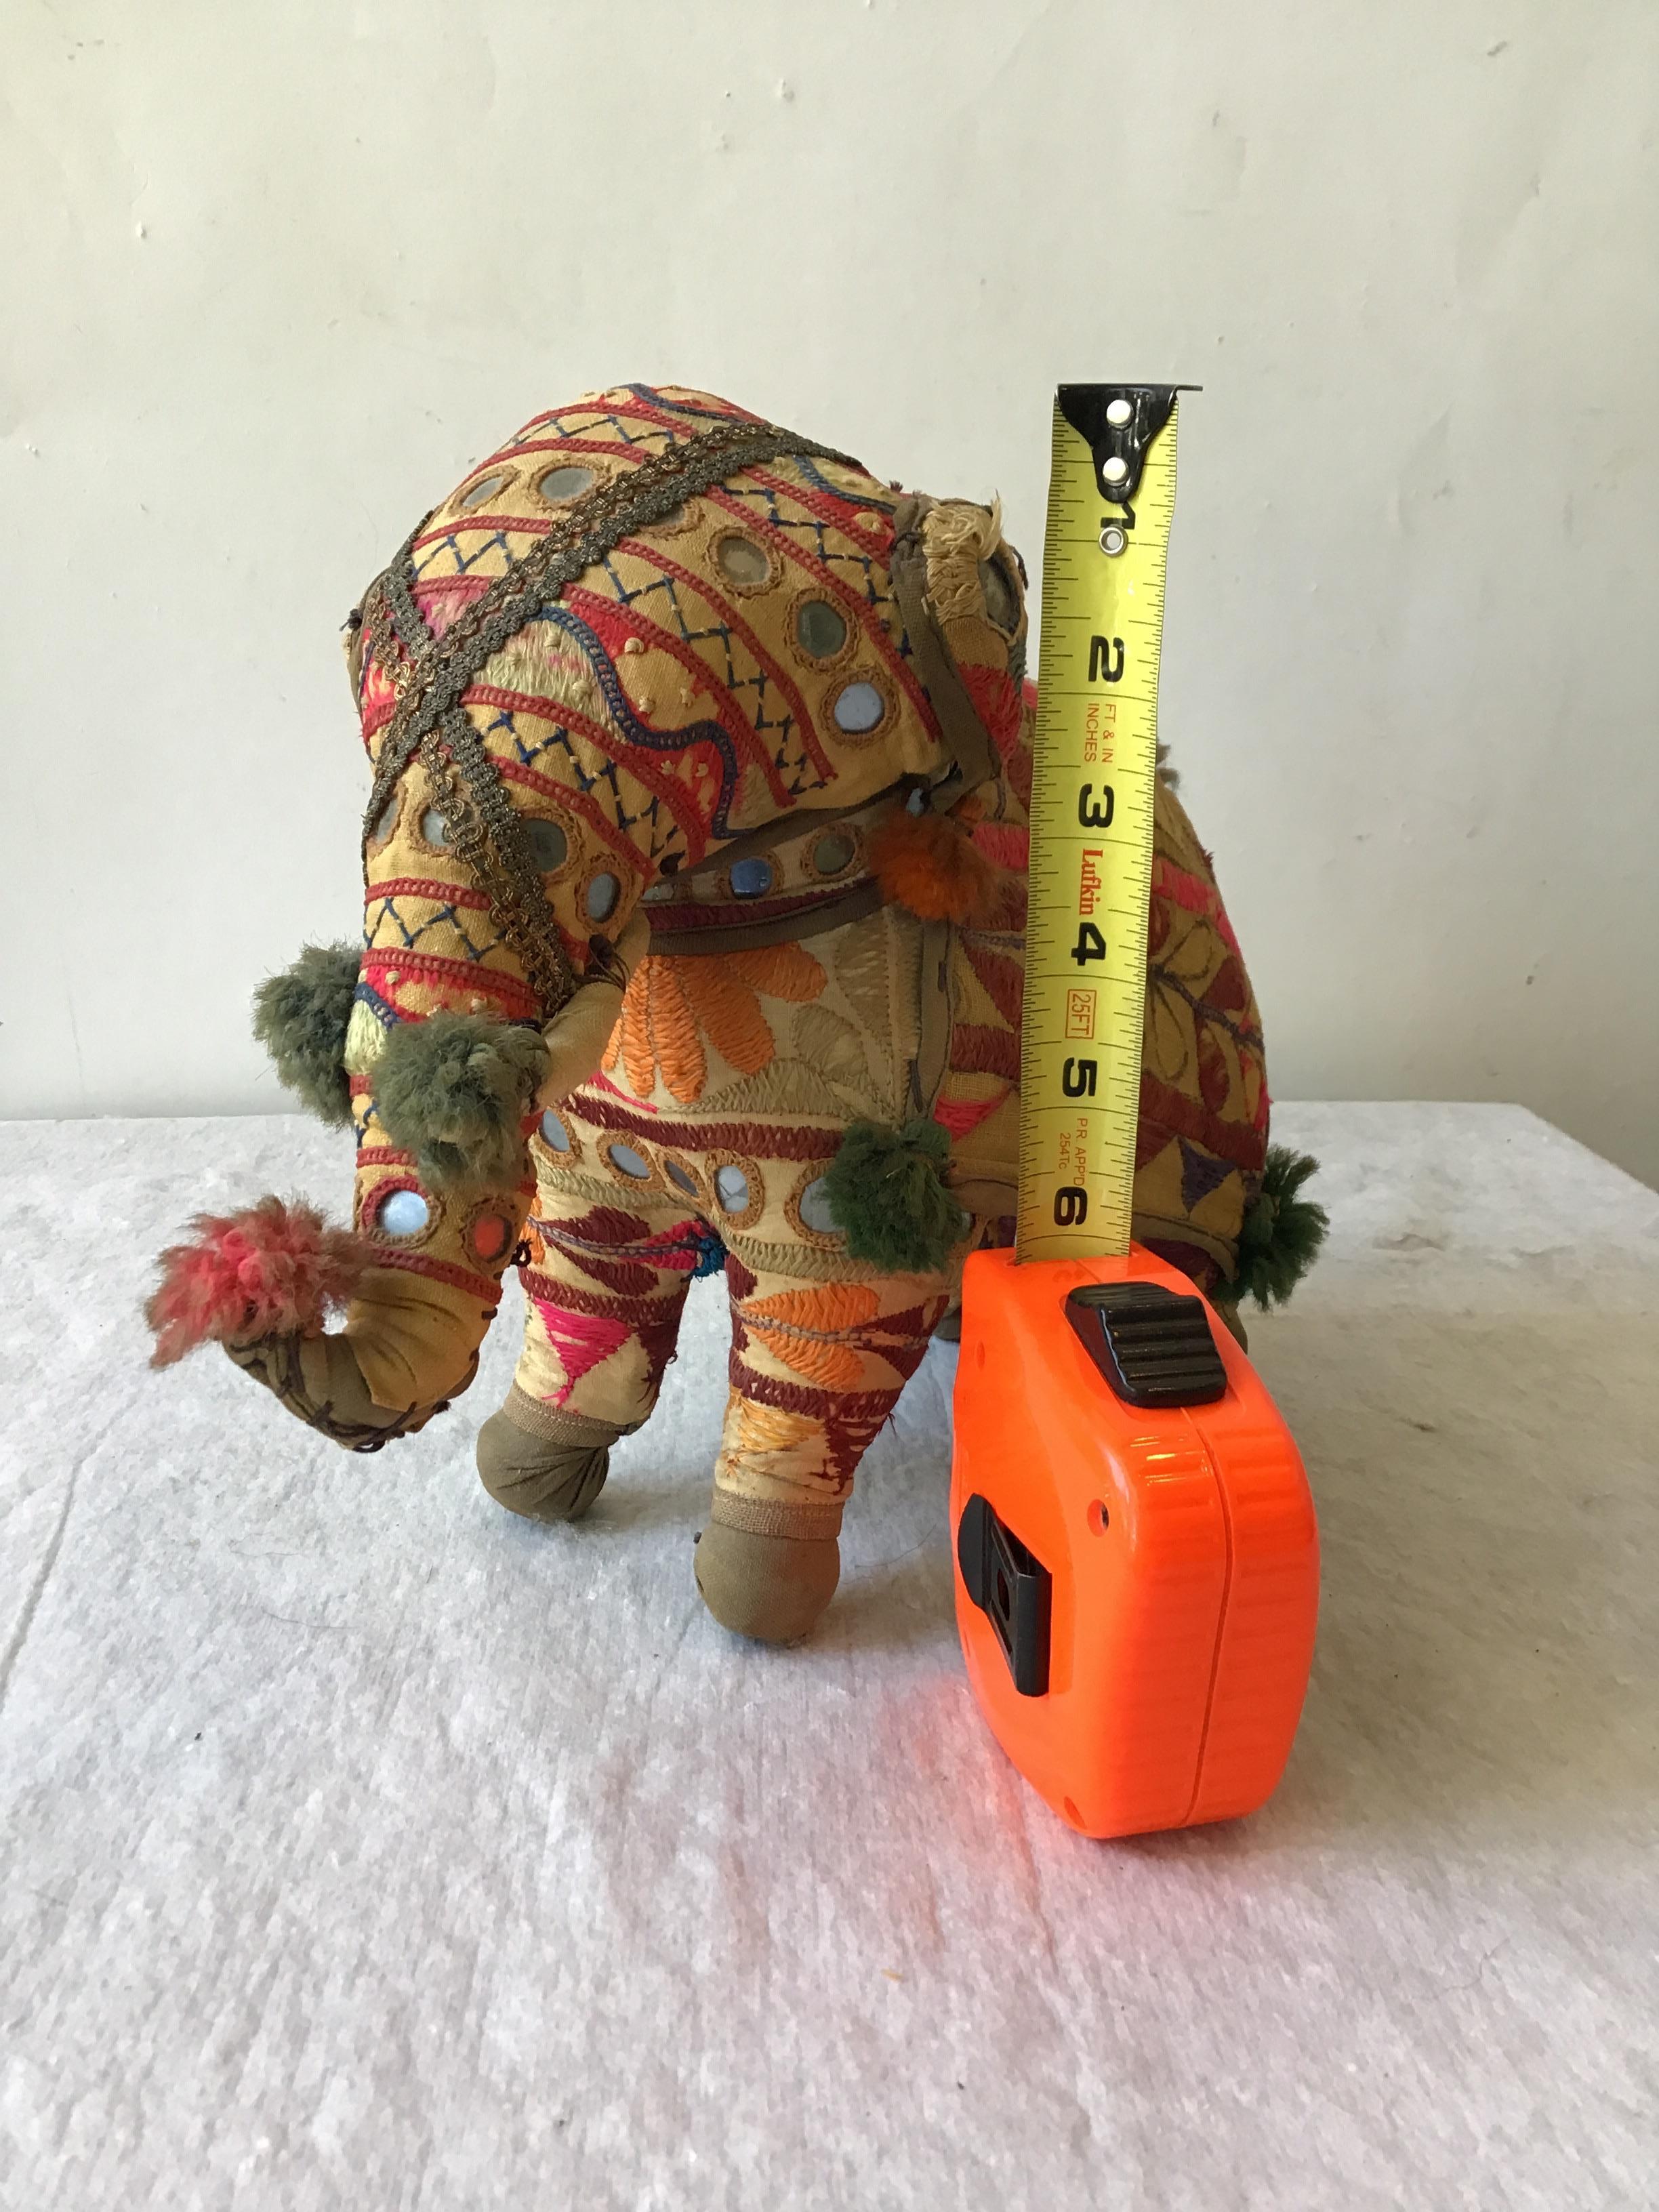 1960s handmade stuffed elephant toy from India. Embroidered fabric decorated with mirrors.